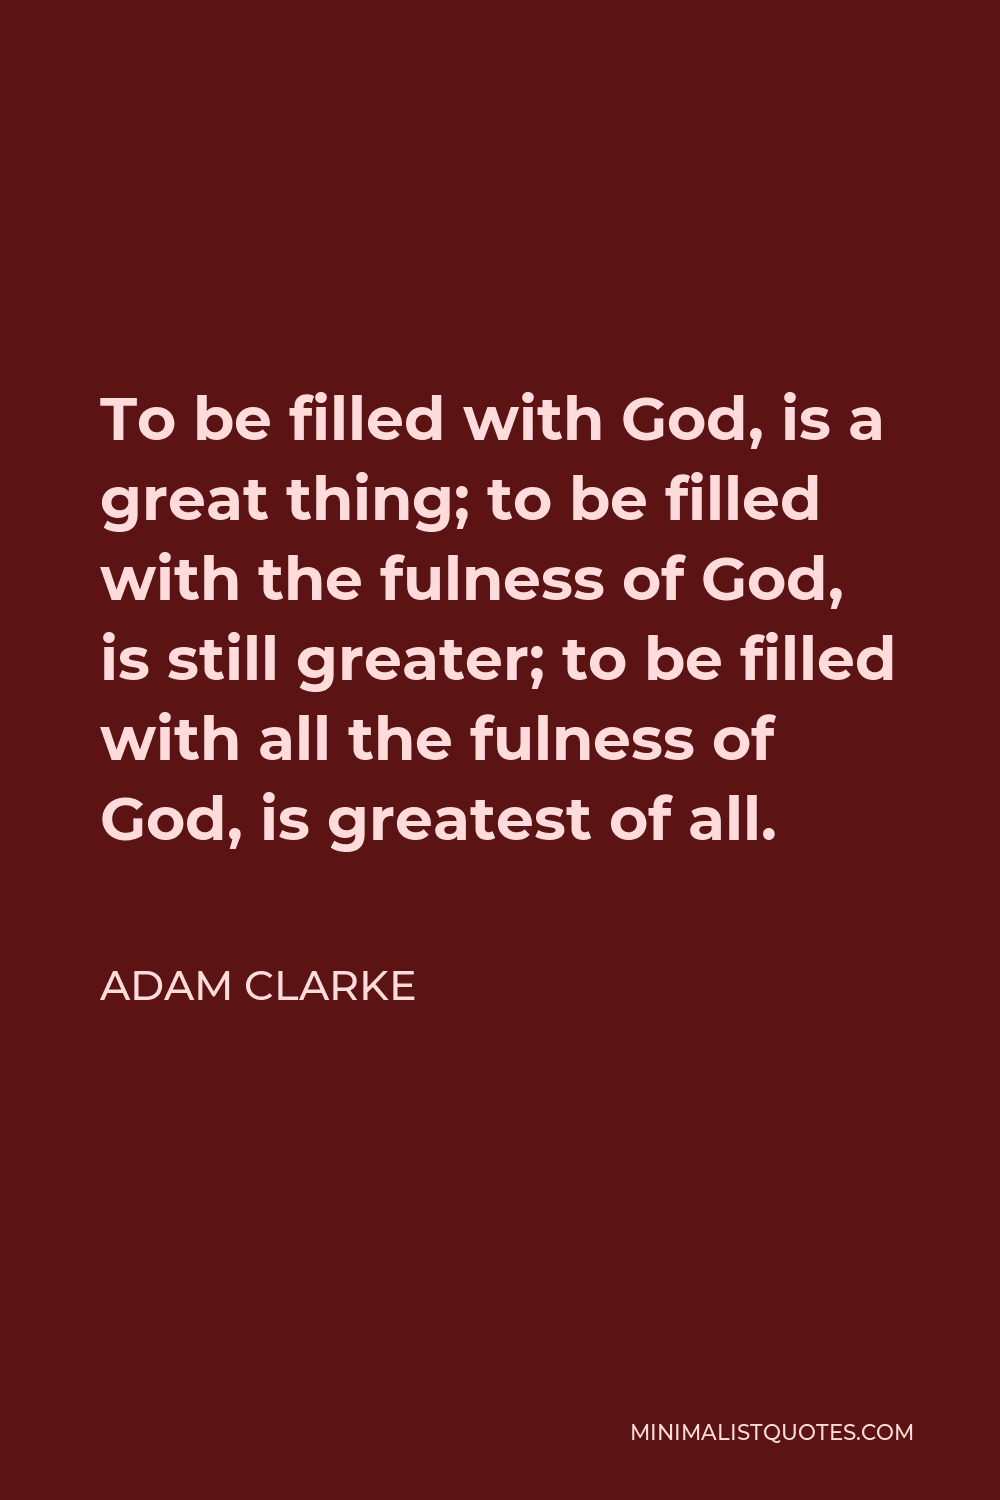 Adam Clarke Quote - To be filled with God, is a great thing; to be filled with the fulness of God, is still greater; to be filled with all the fulness of God, is greatest of all.